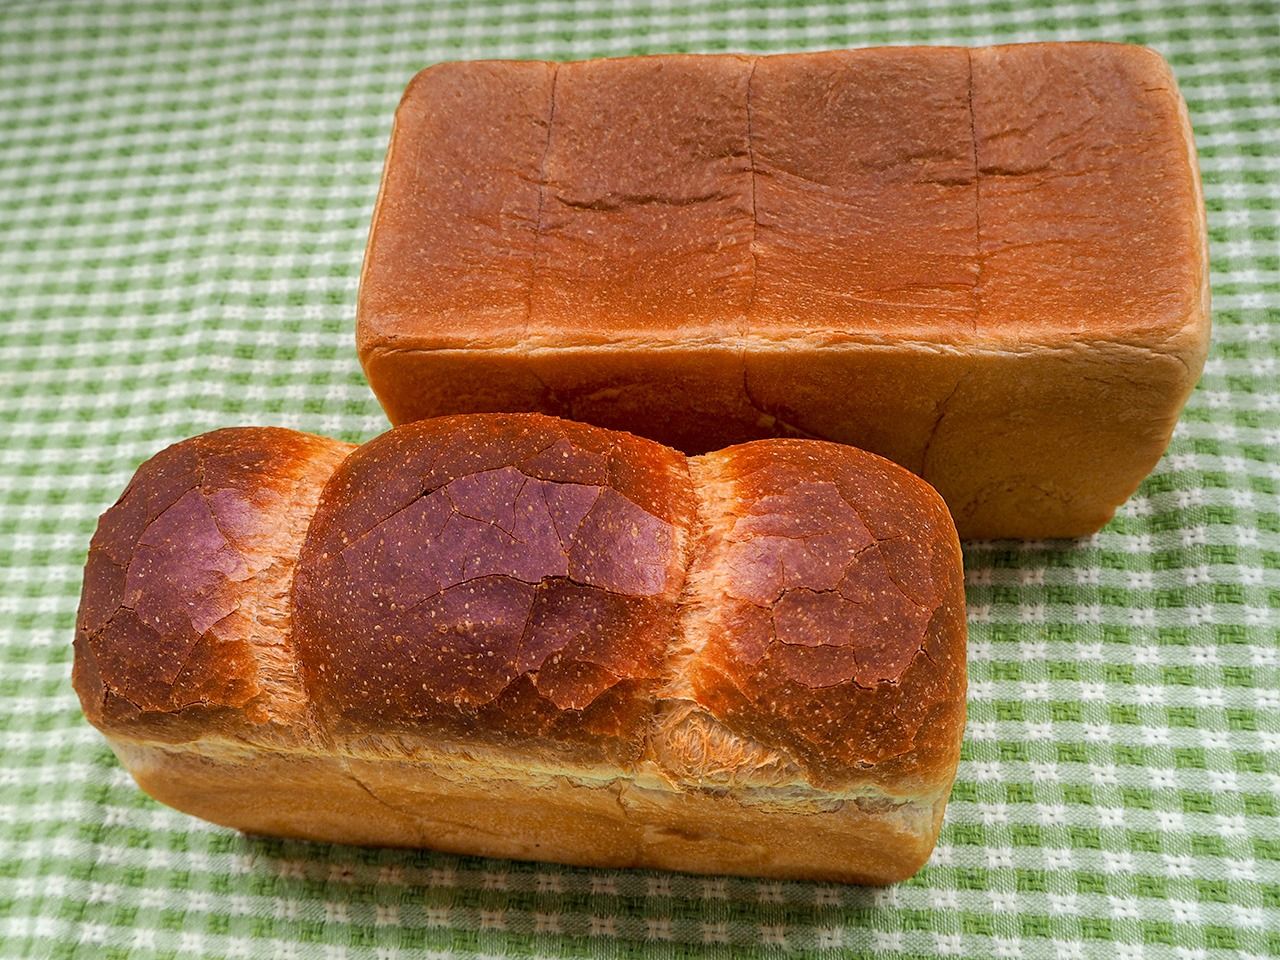 A loaf of premium white bread from Ginza’s Centre the Bakery.